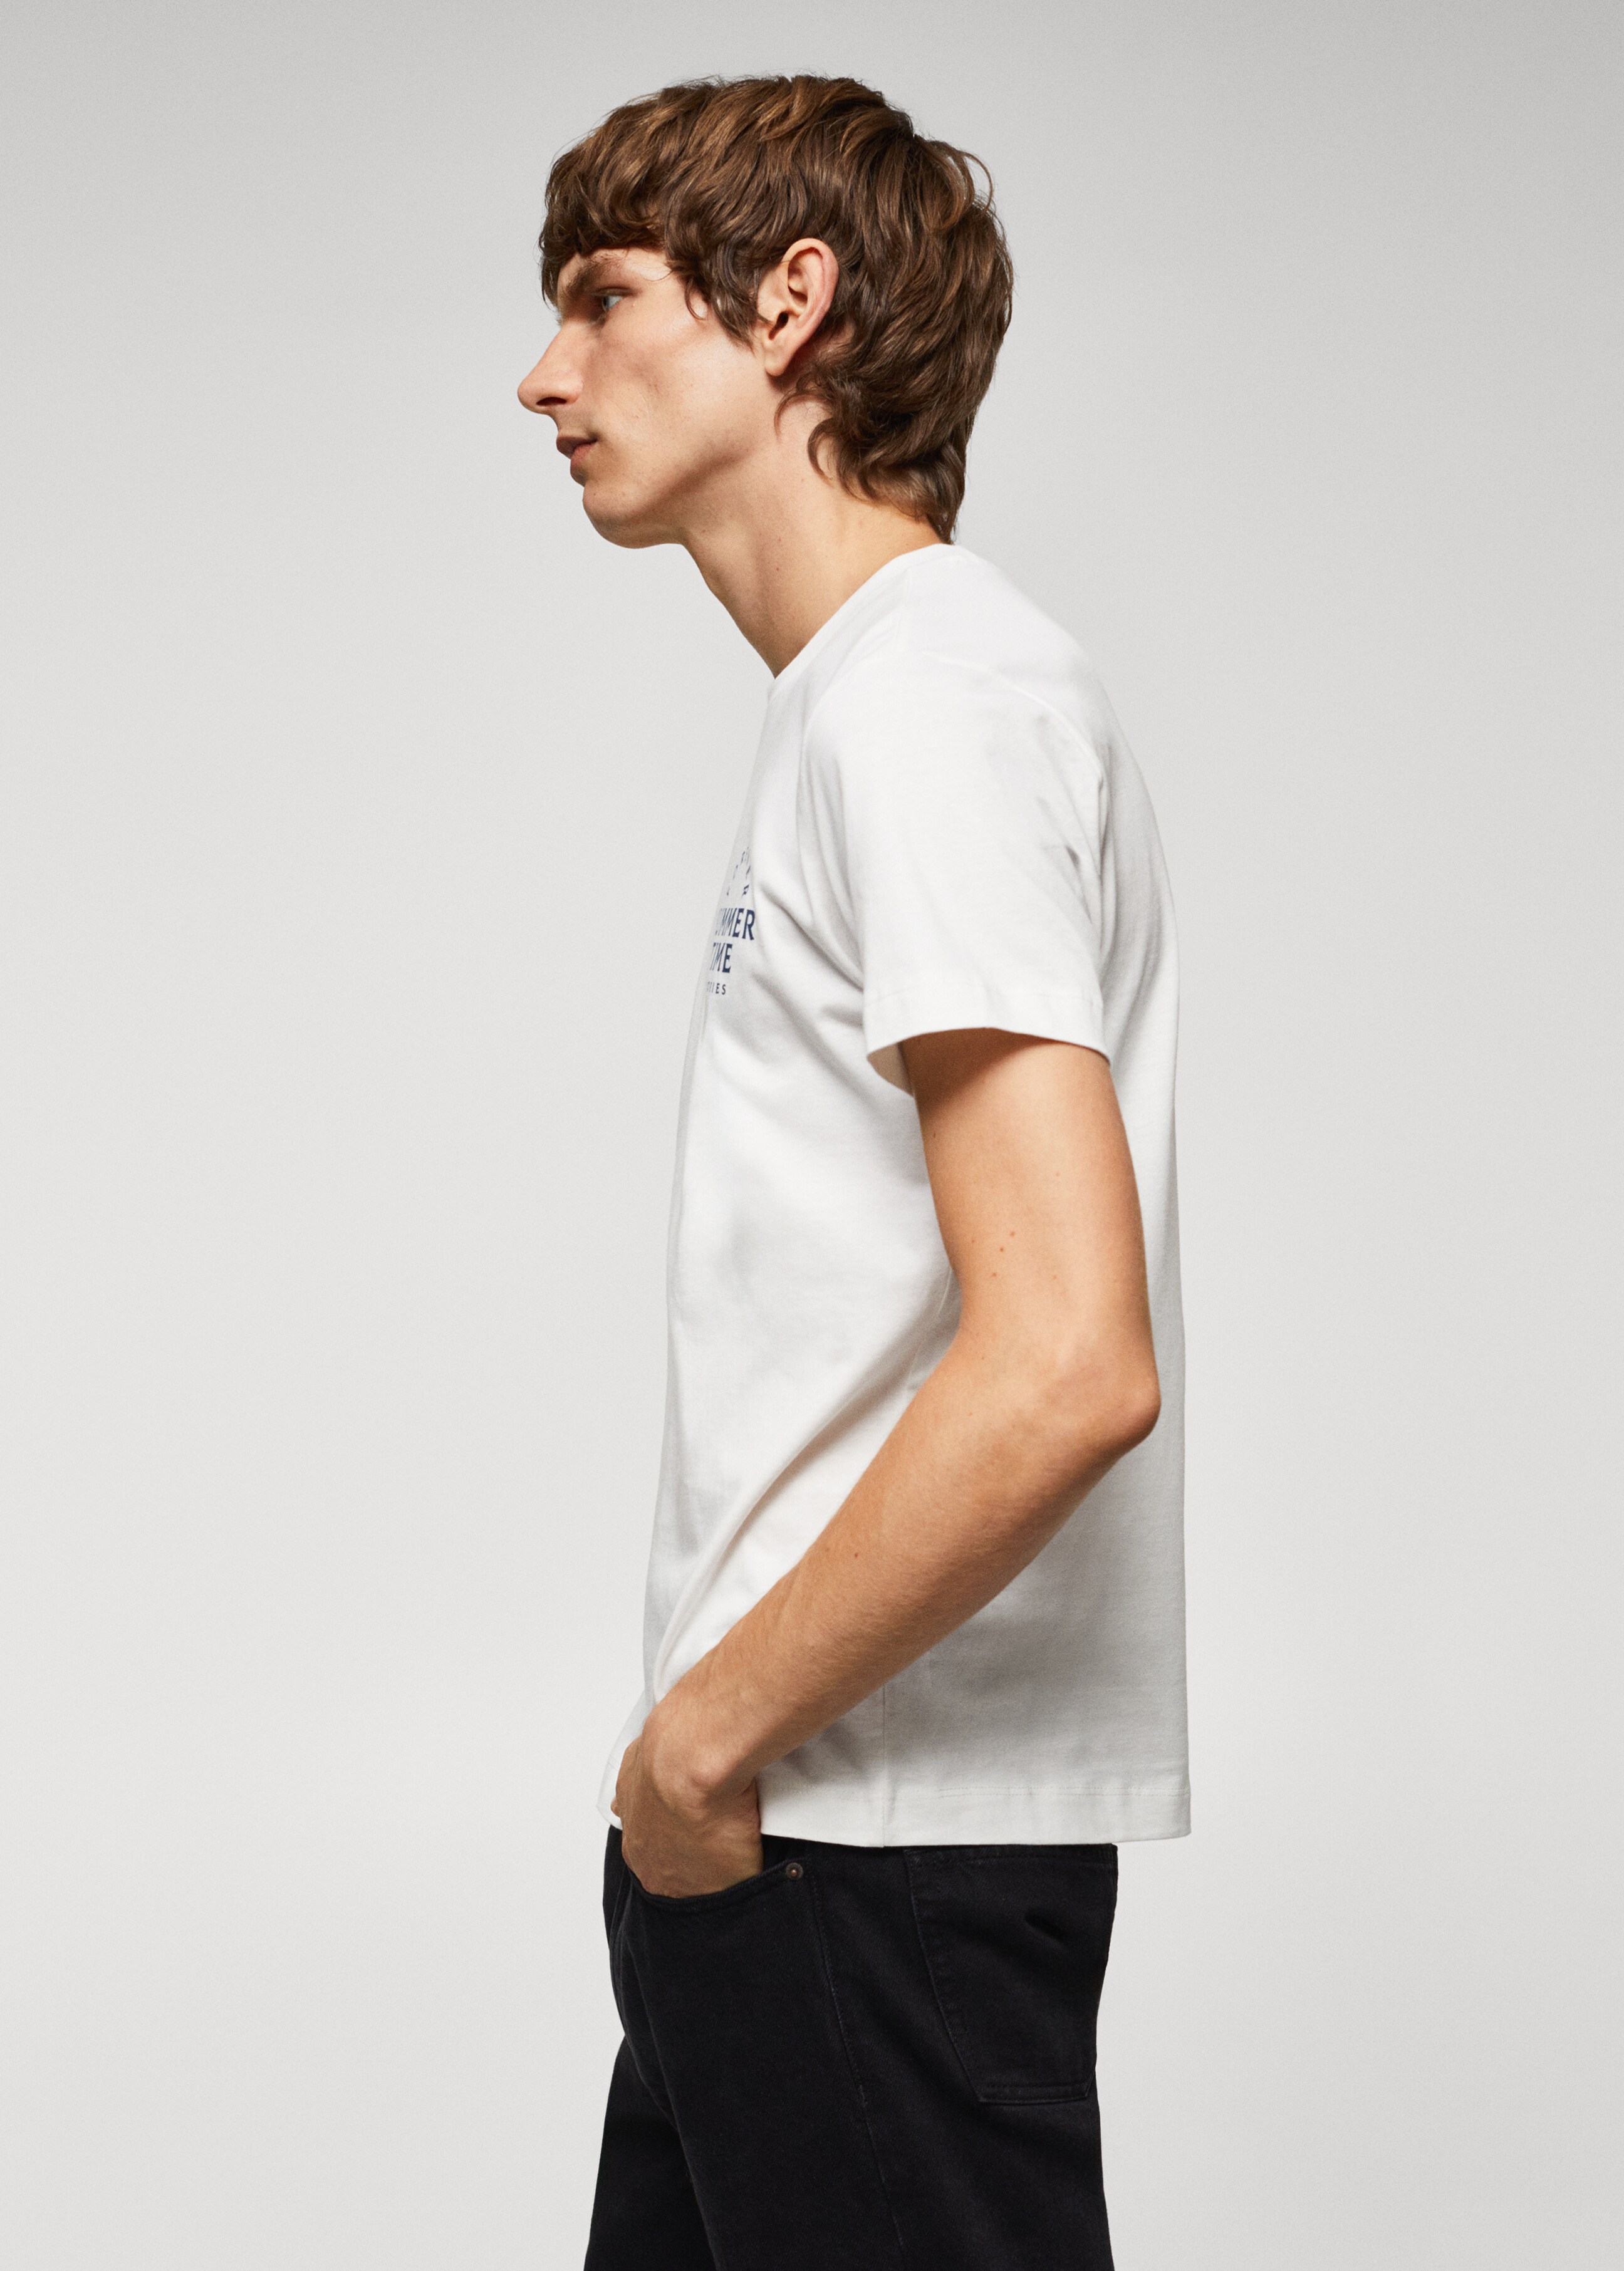 100% cotton printed t-shirt - Details of the article 2